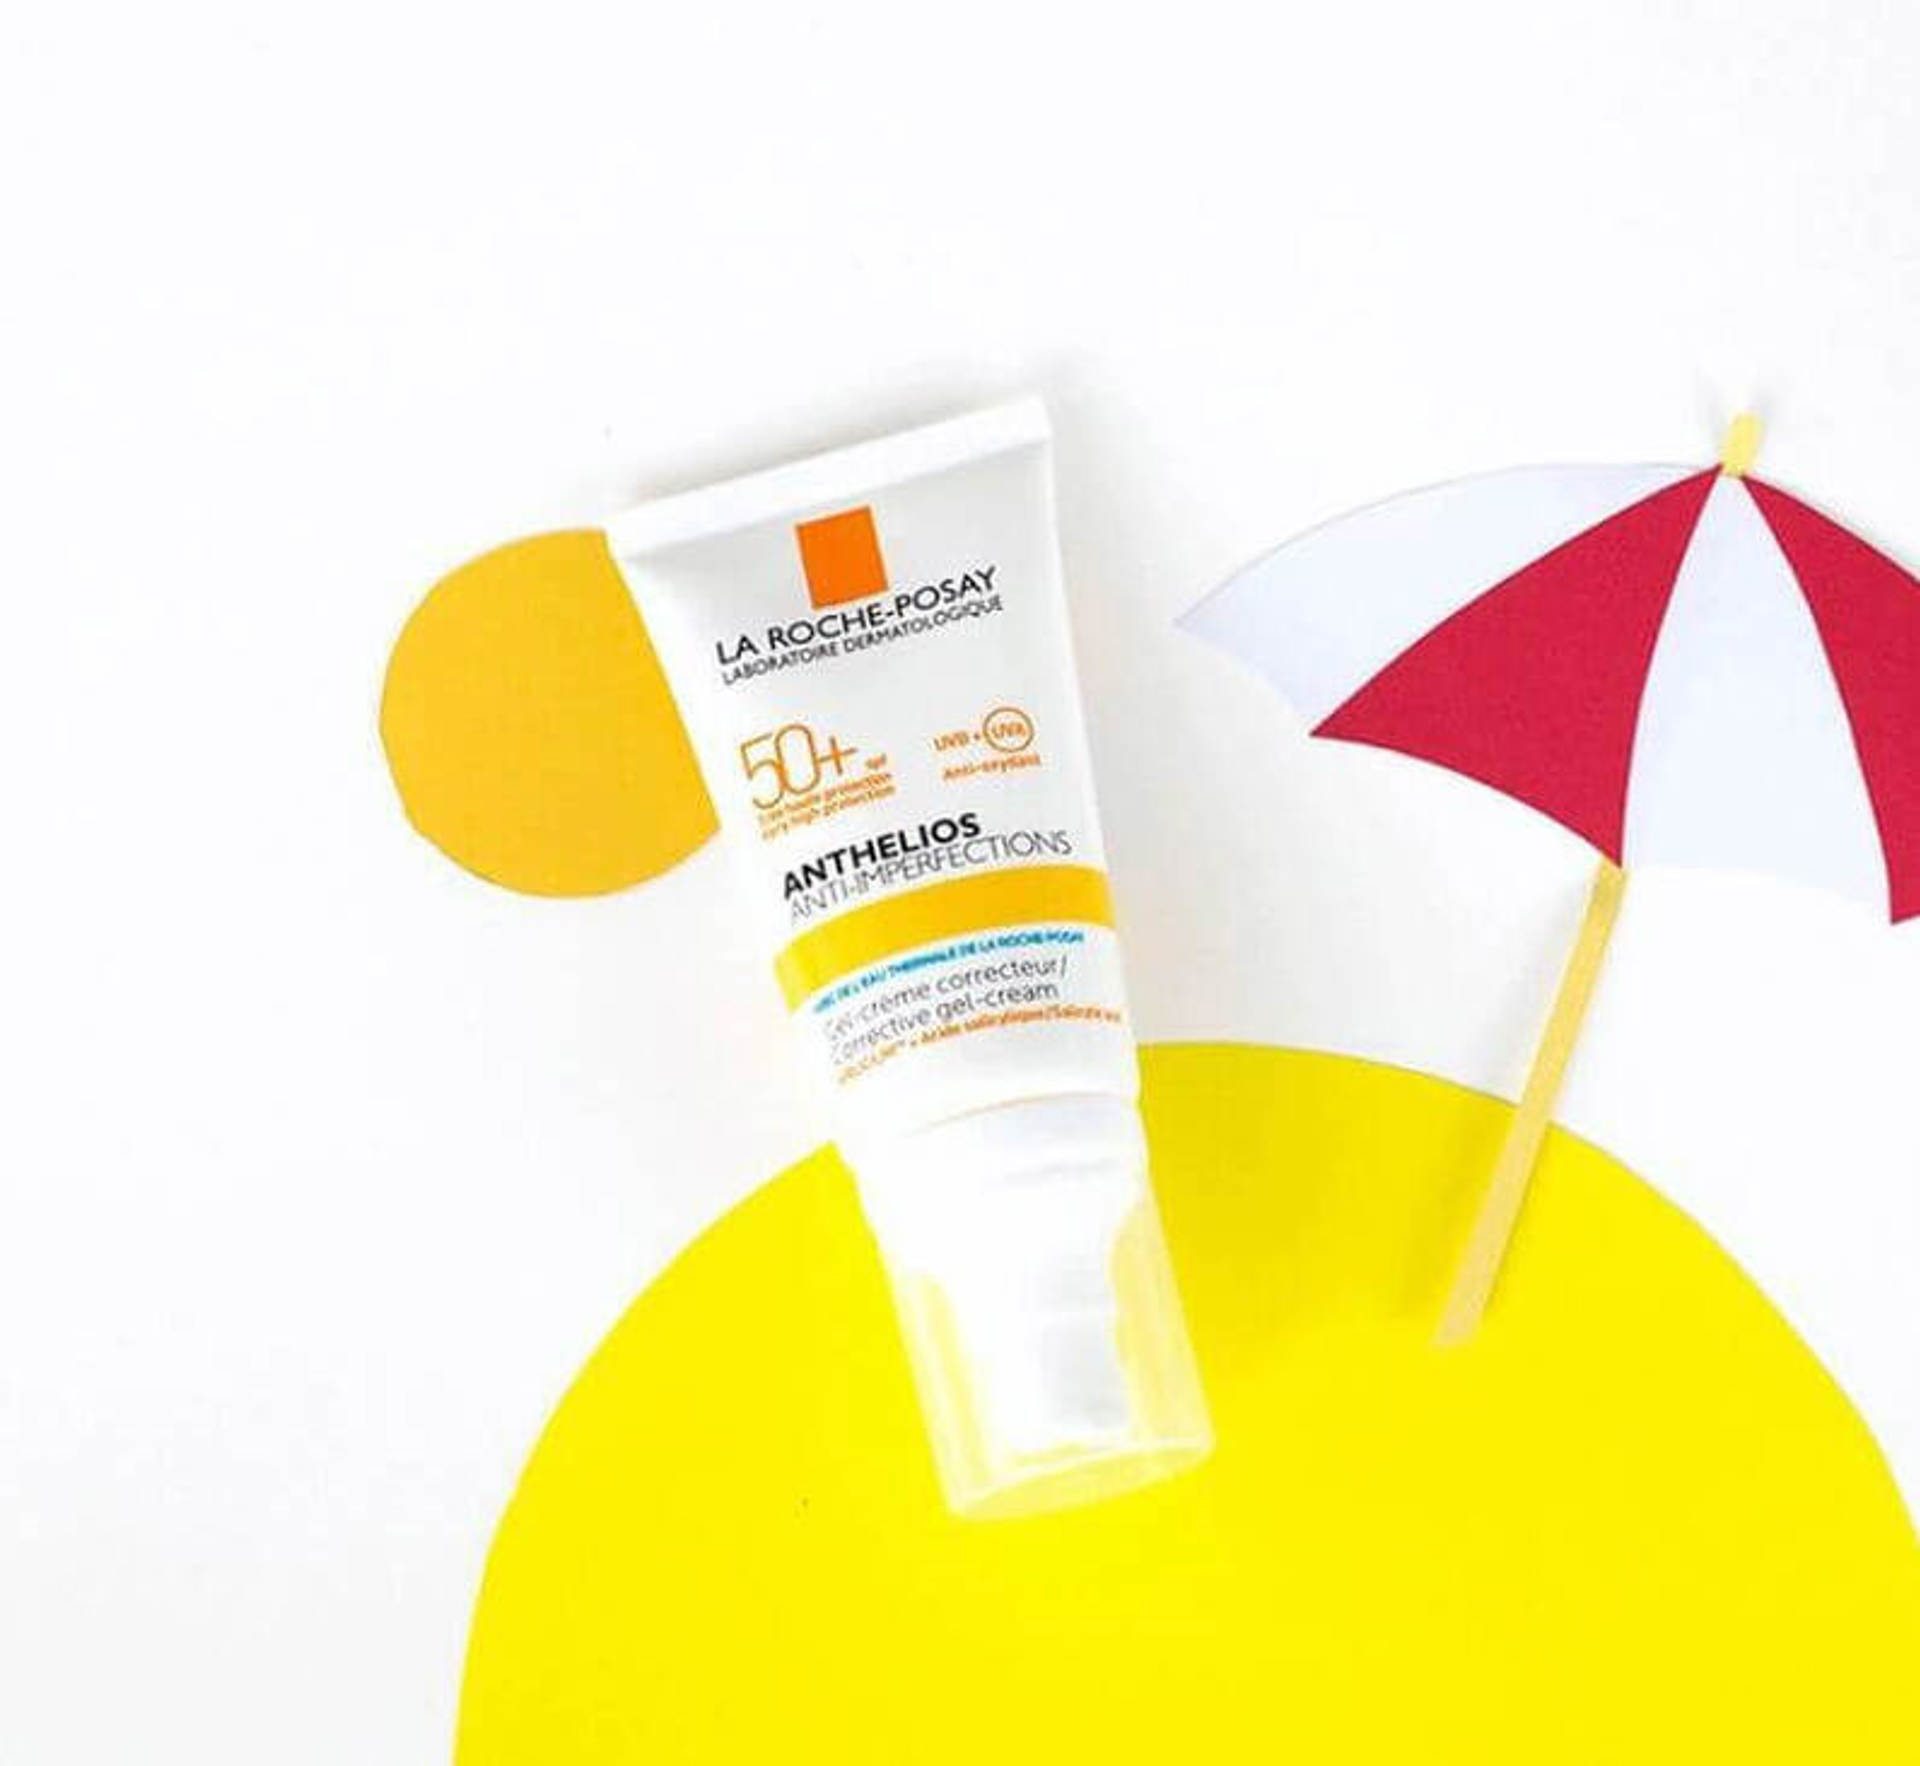 La Roche-Posay Anthelios Anti-Imperfections SPF 50+